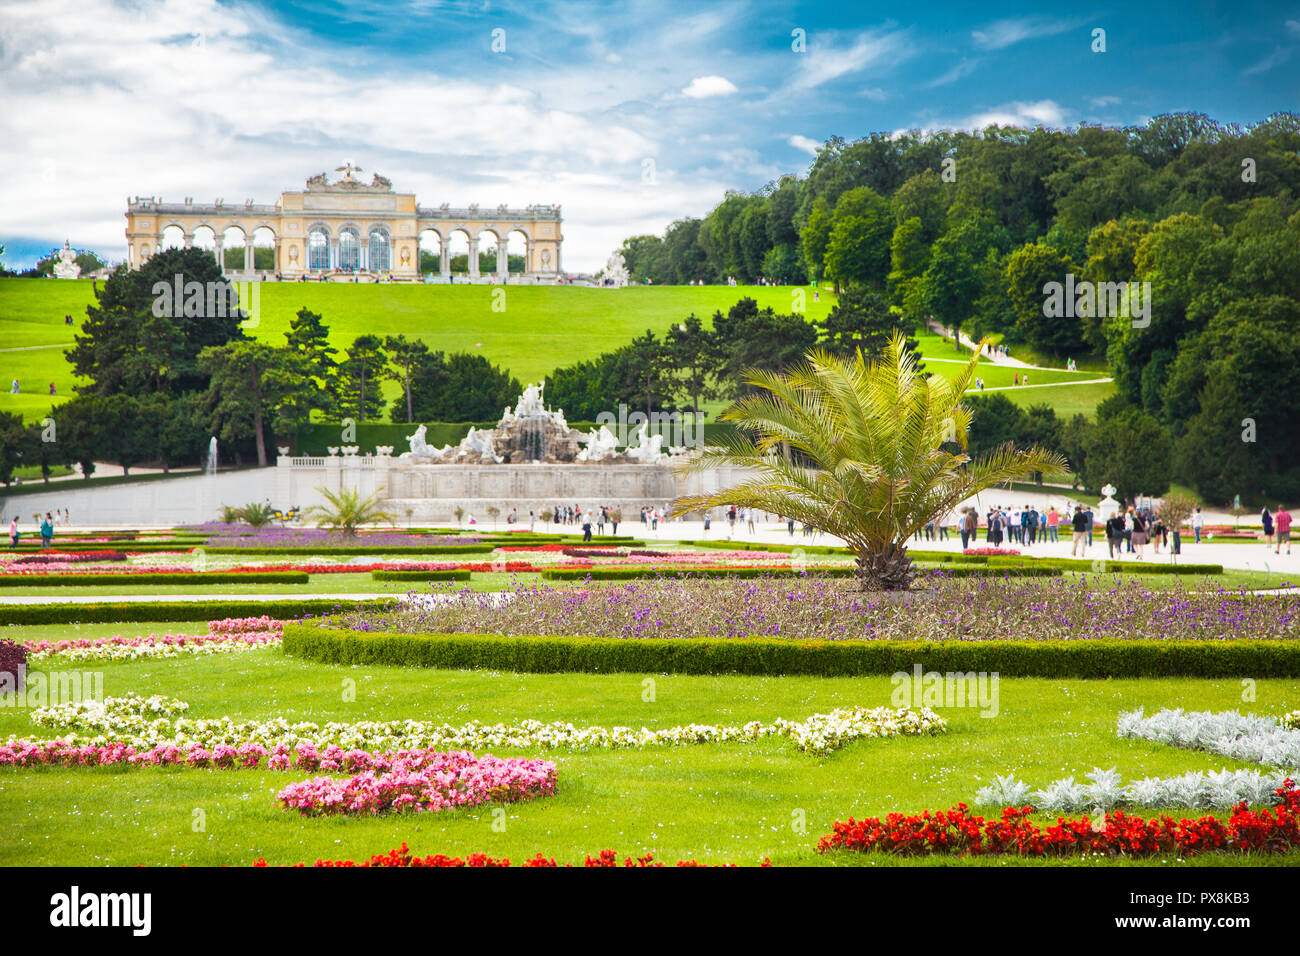 Classic view of famous Schonbrunn Palace with scenic Great Parterre garden on a beautiful sunny day with blue sky and clouds in summer, Vienna Stock Photo